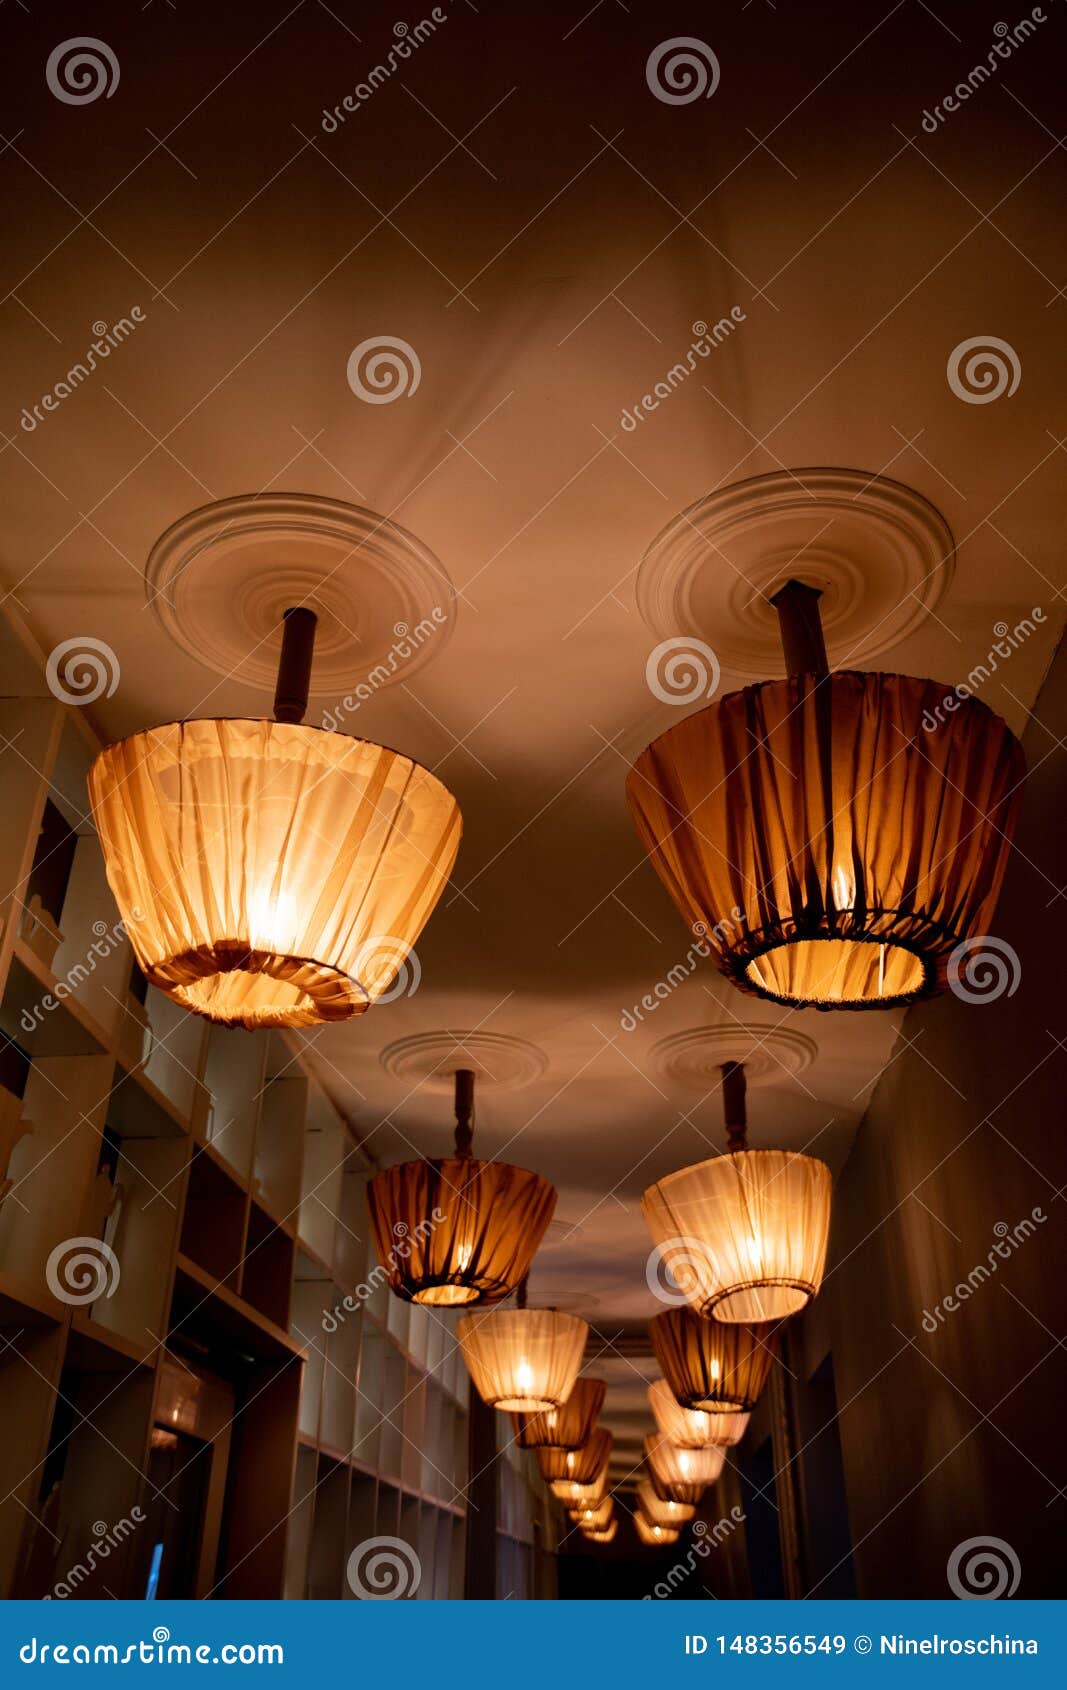 Rows Of Ceiling Lamps With Retro Style Lampshades Draped With